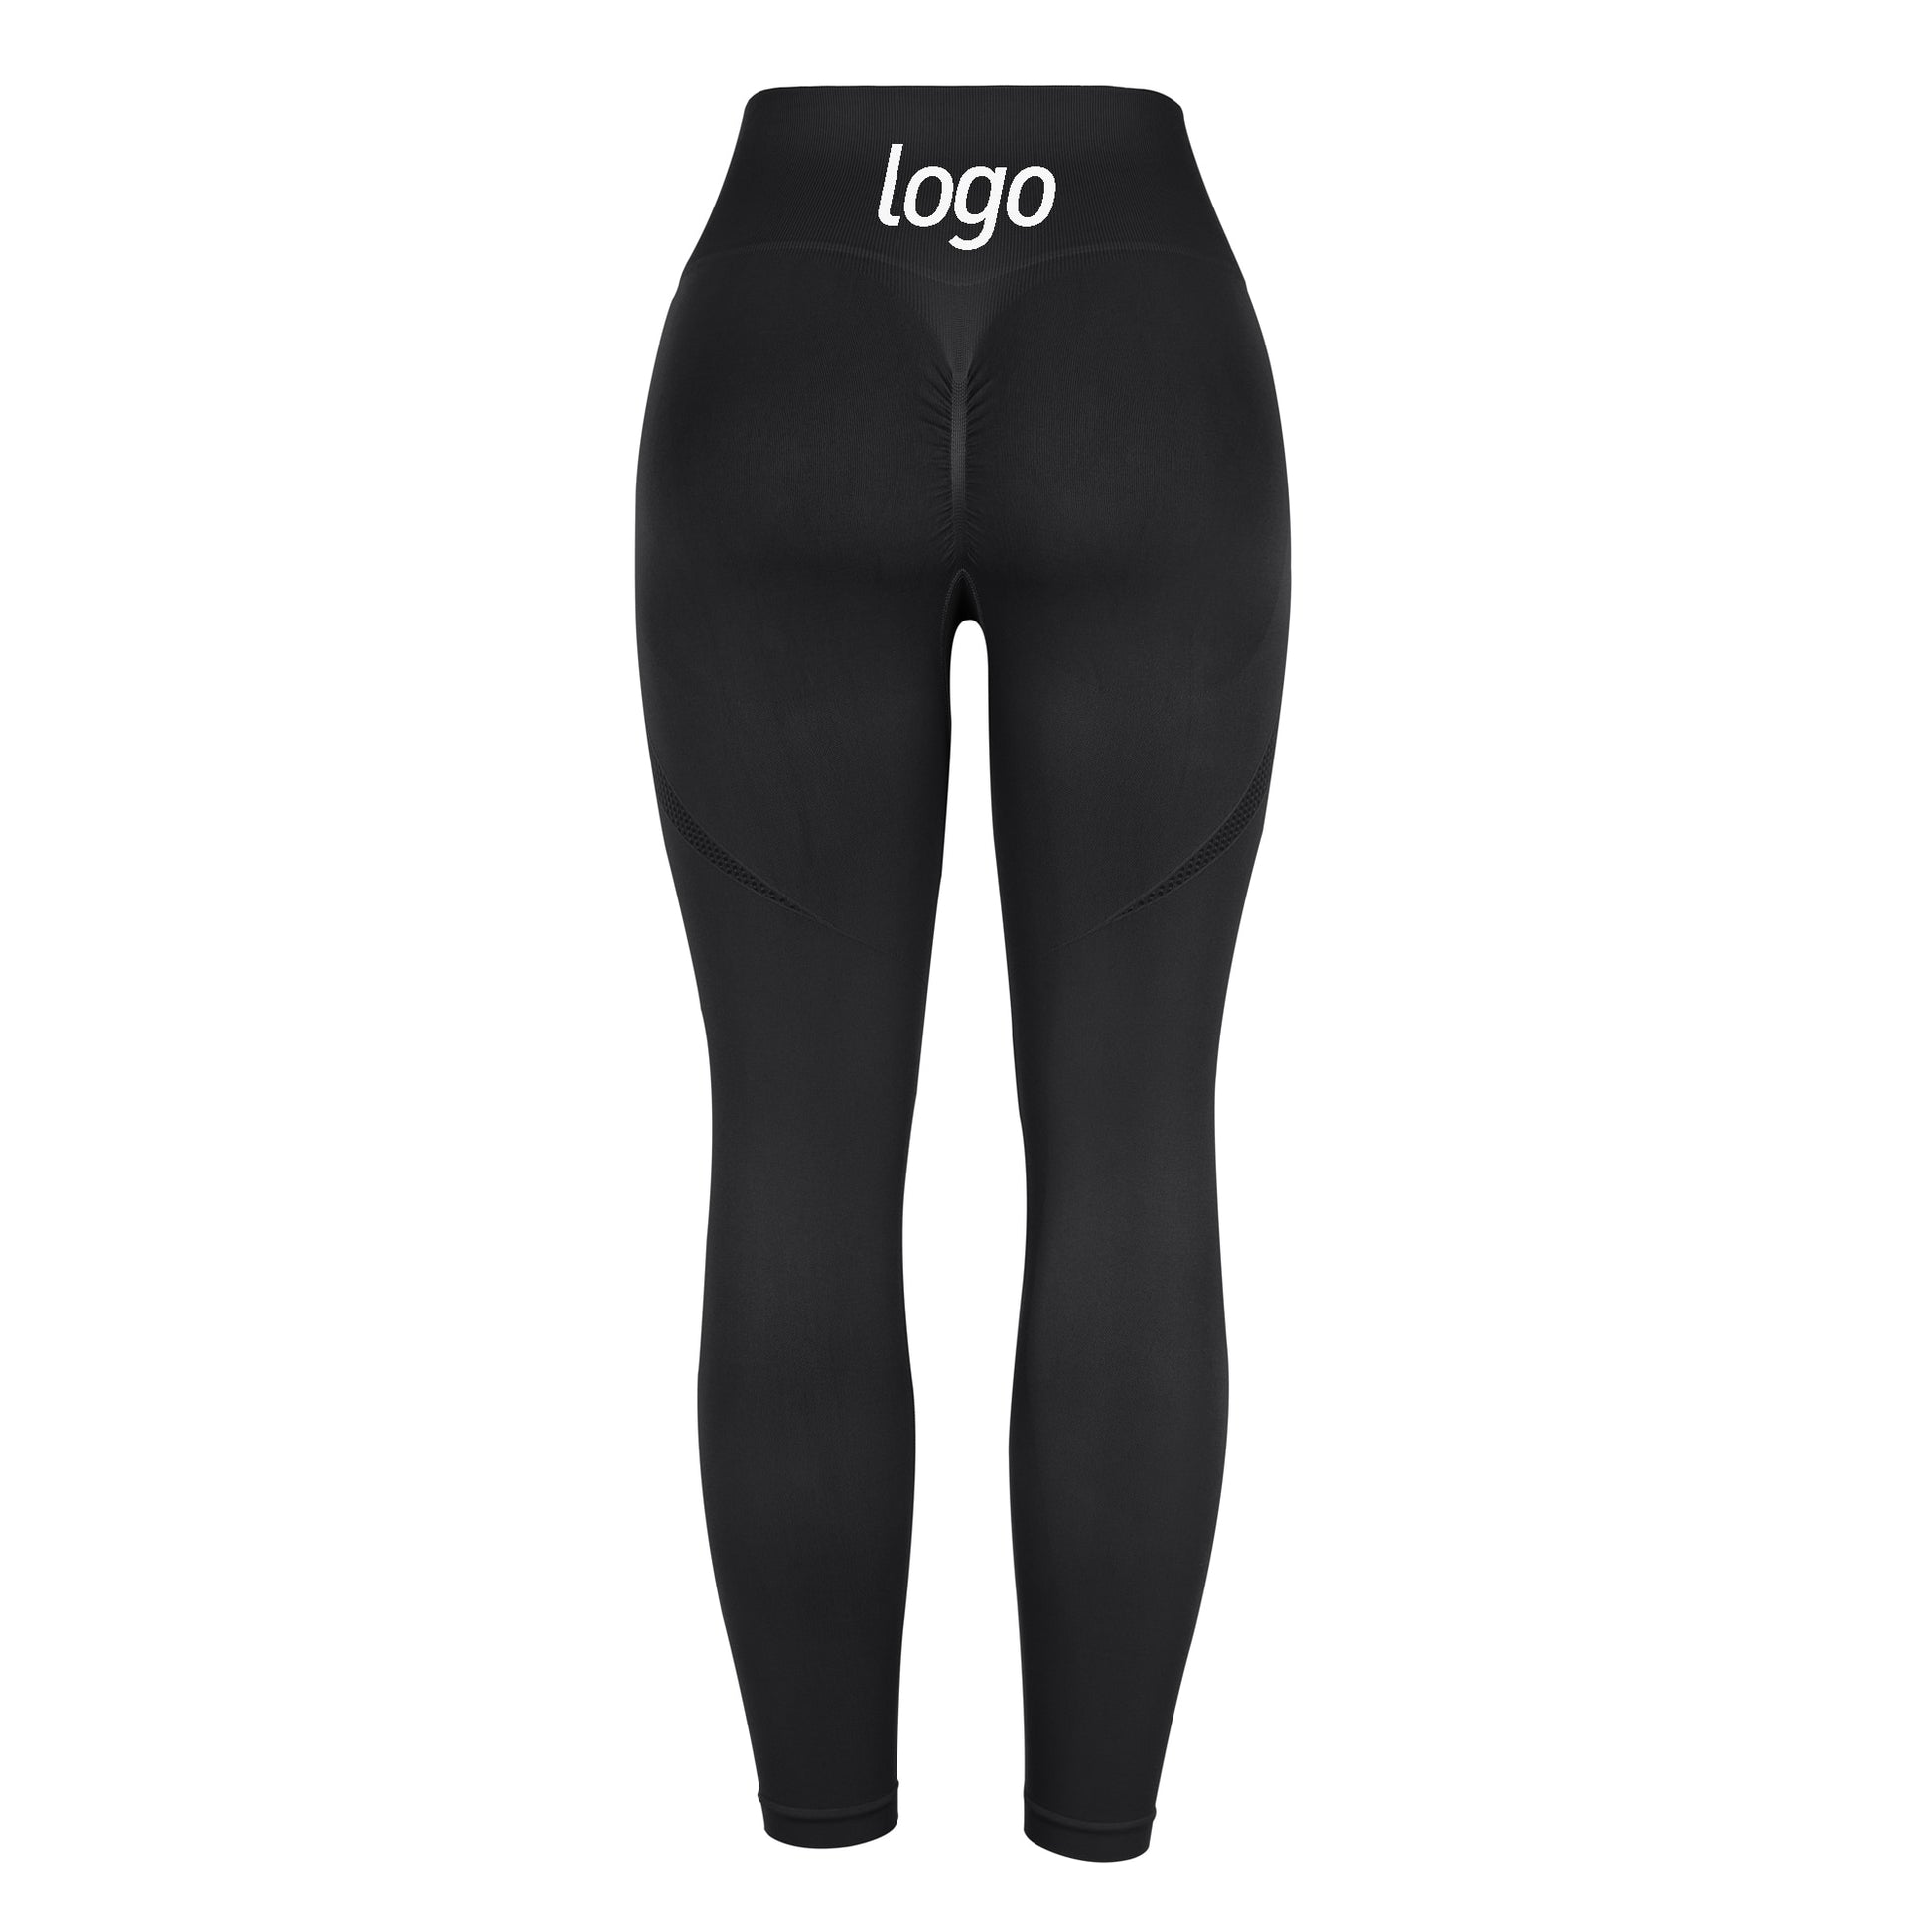 Tie Dye Fitness Legging Woman Push Up Workout Sport Leggings Scrunch Butt Outfit Gym Seamless Legging Pants The Clothing Company Sydney